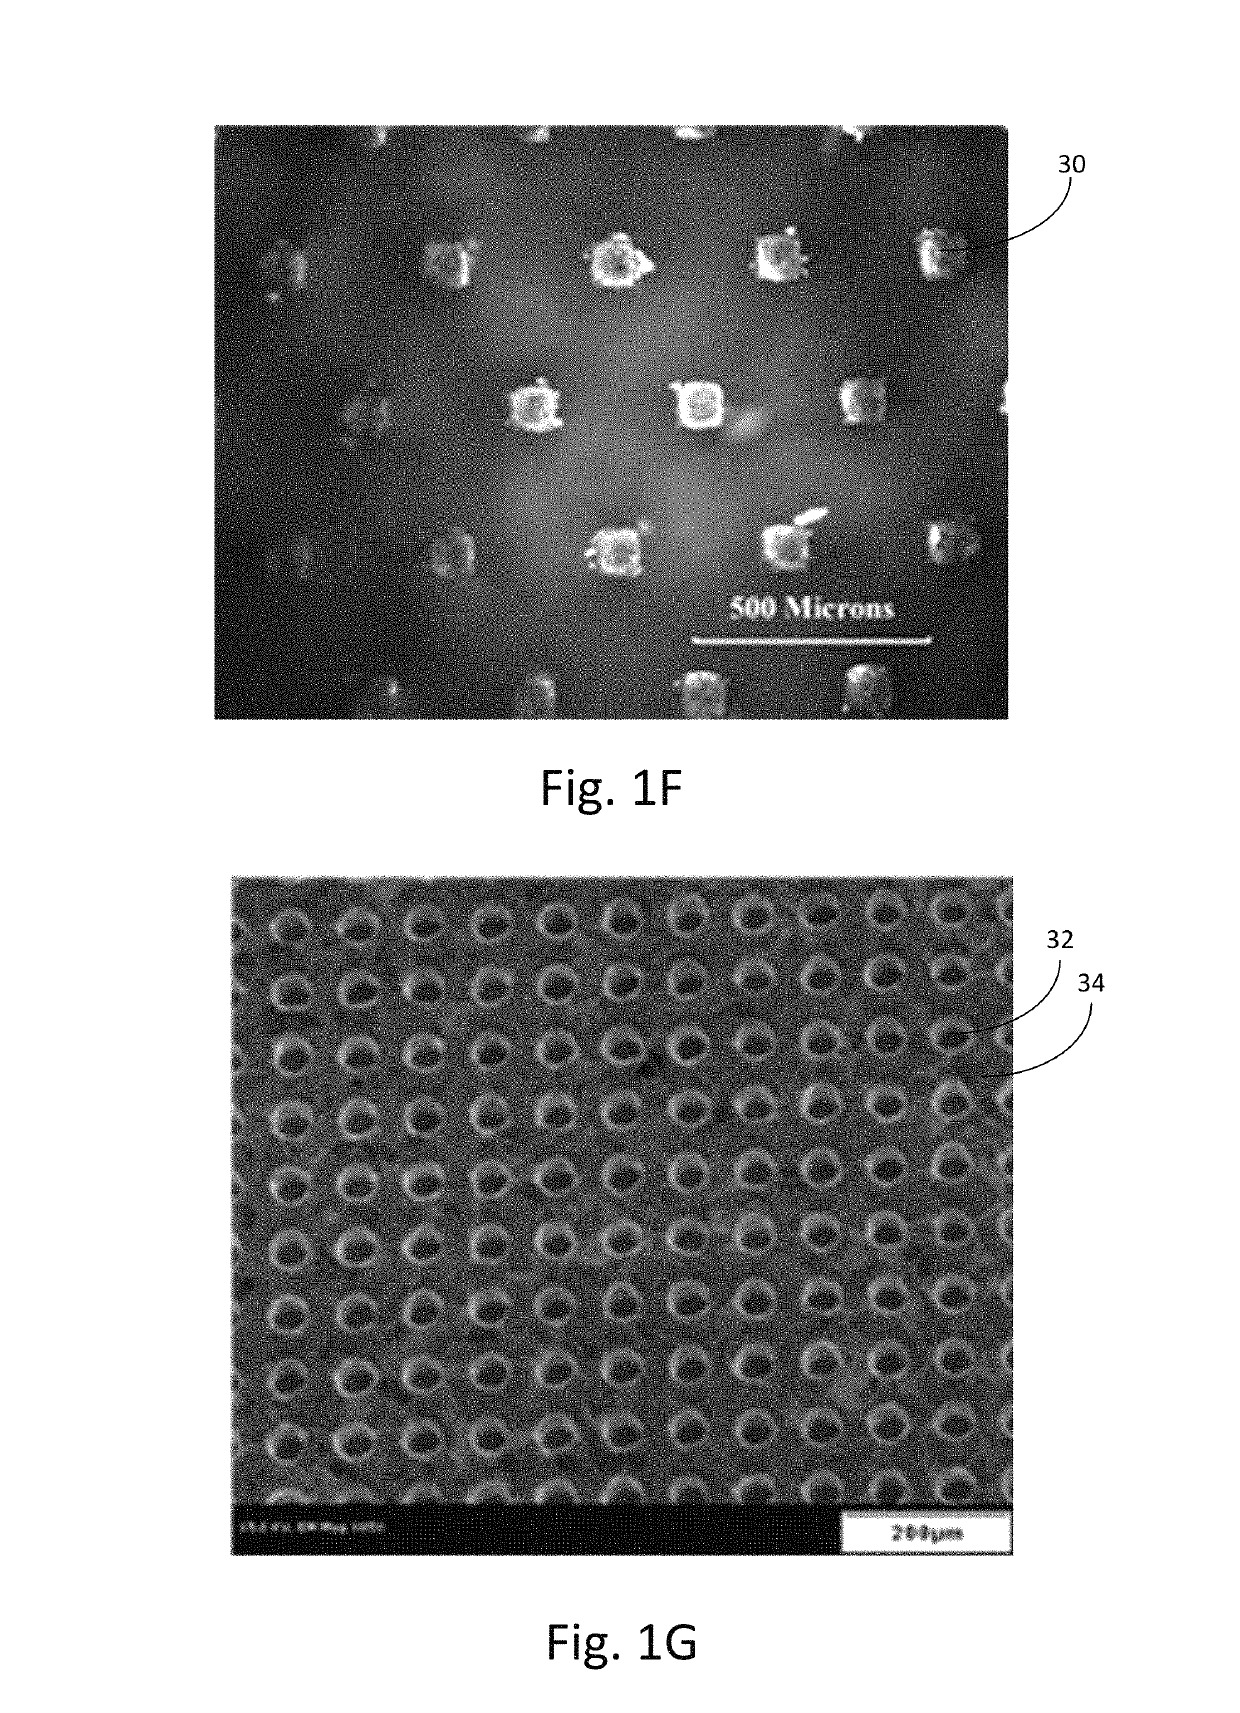 Microstructure arrangement for gripping low coefficient of friction materials